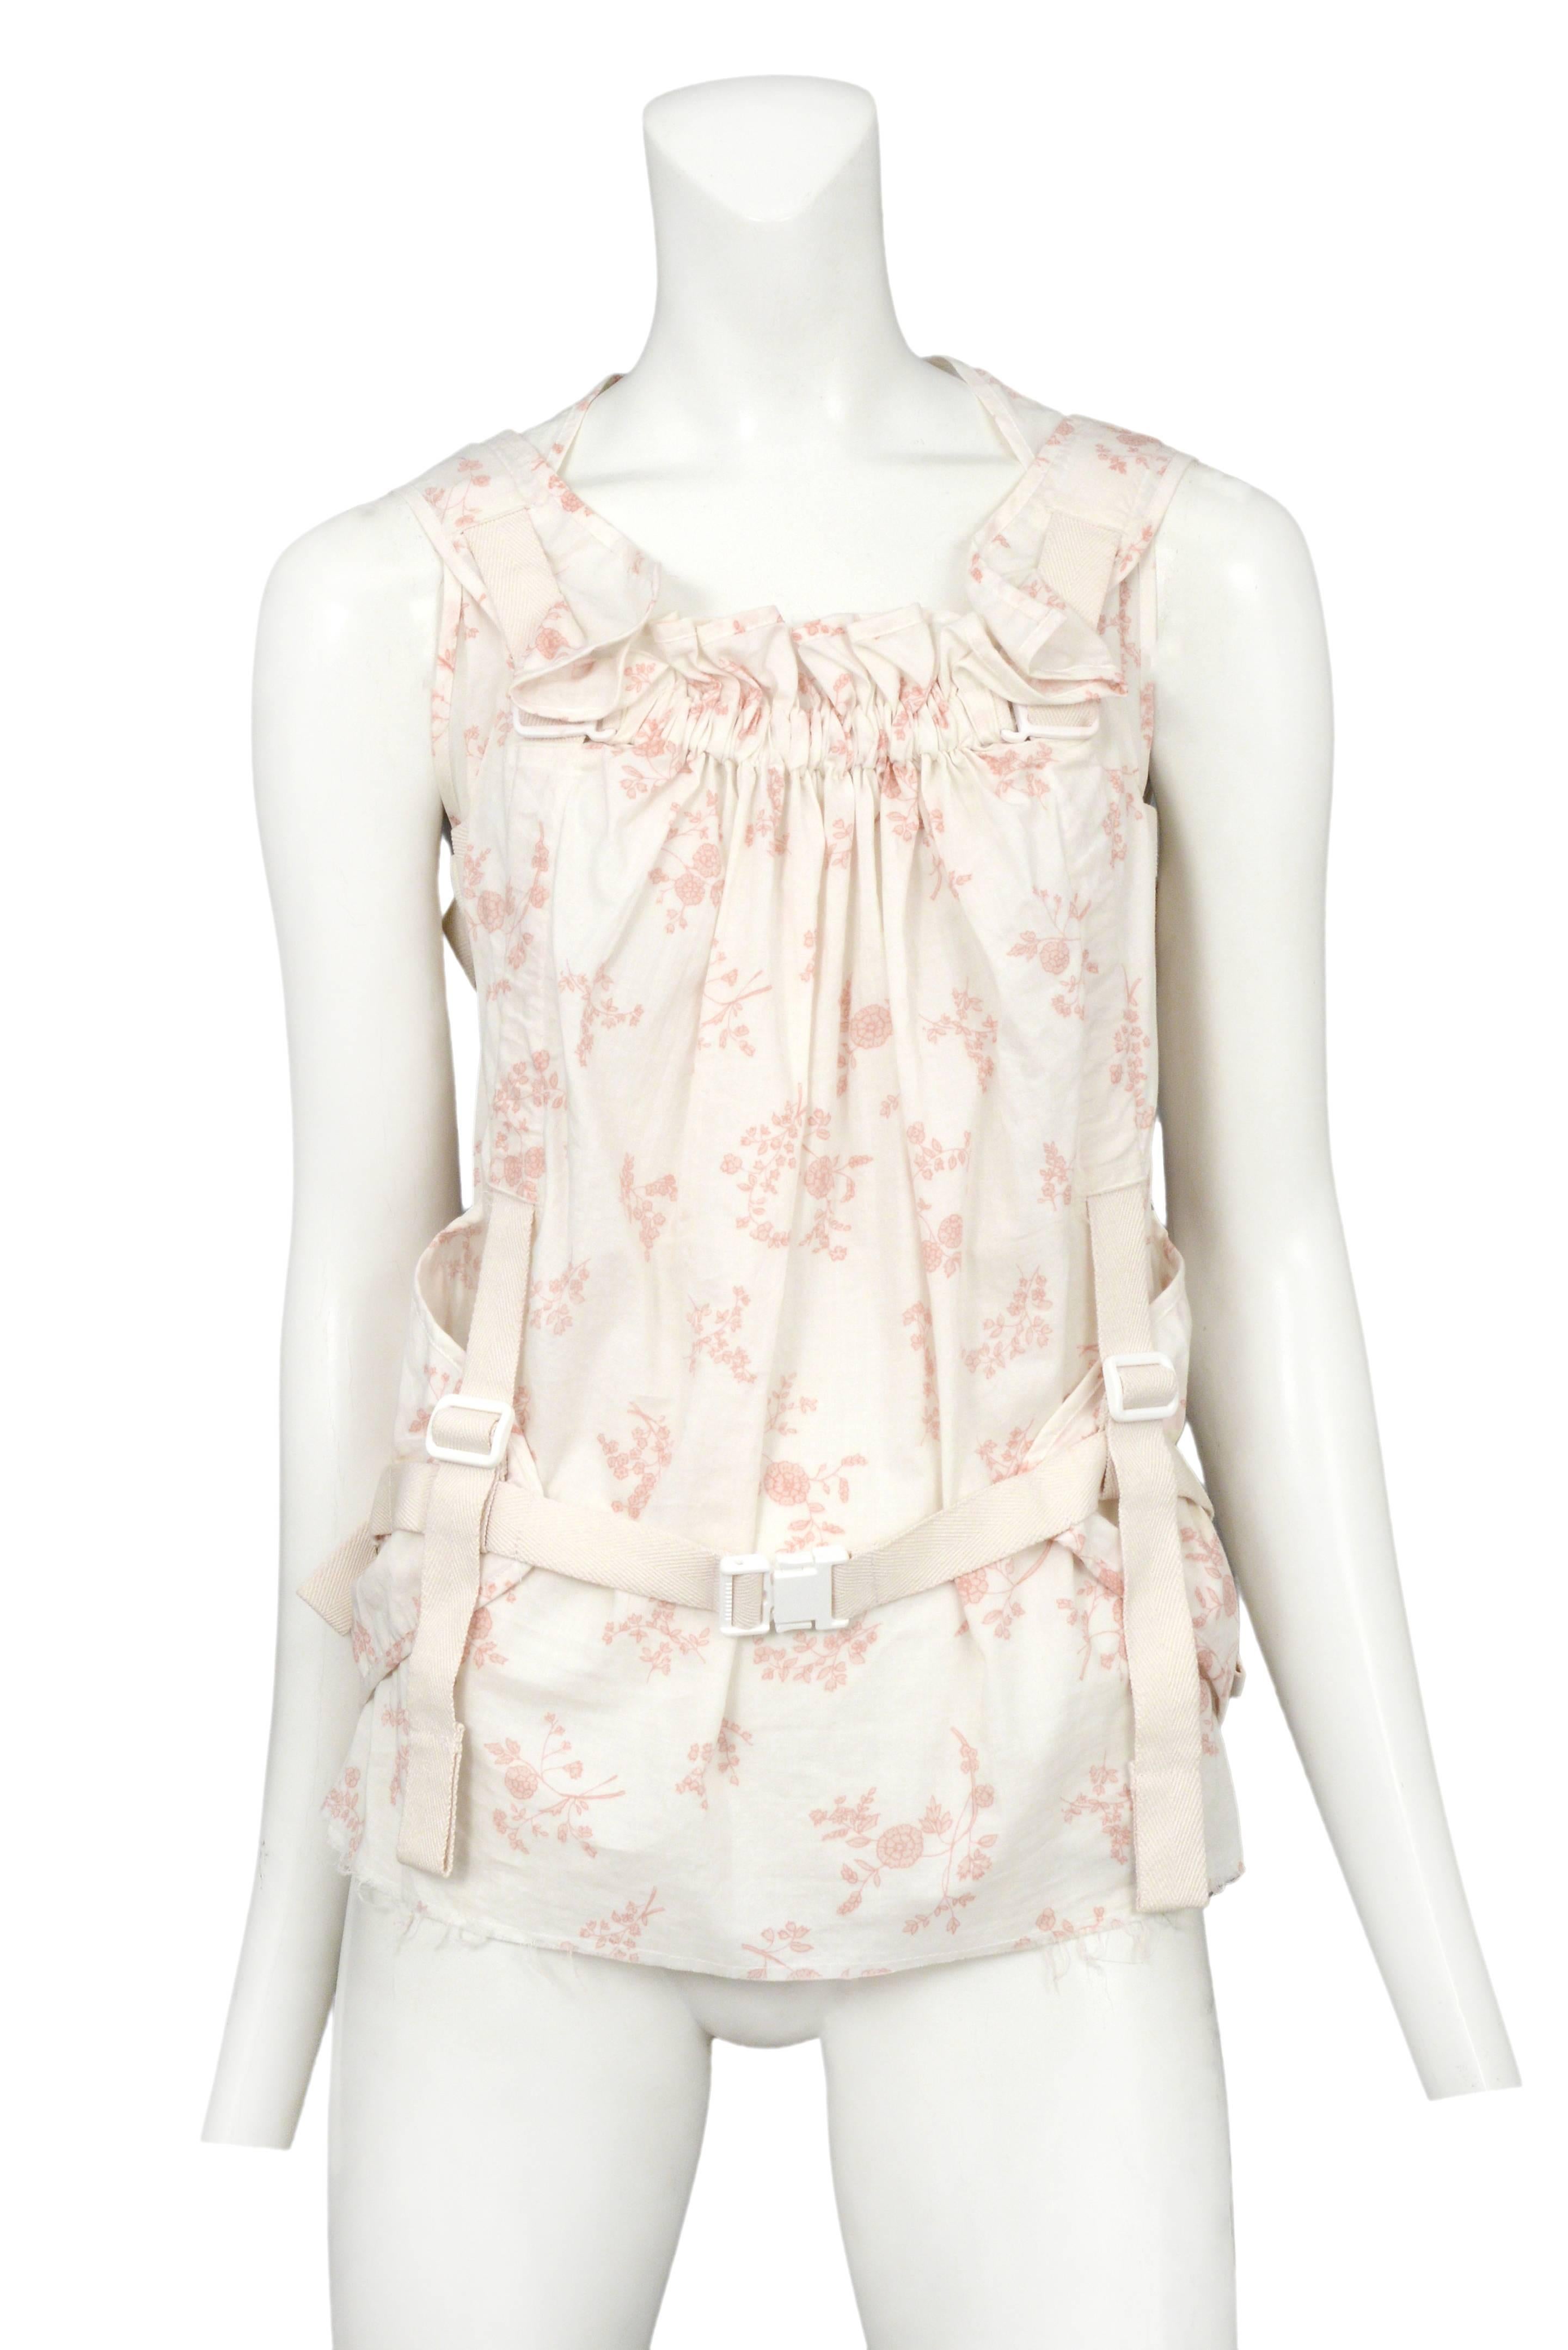 Vintage Junya Watanabe sleeveless parachute top featuring an allover pink and white floral print. Circa 2003.
Please inquire for additional images.